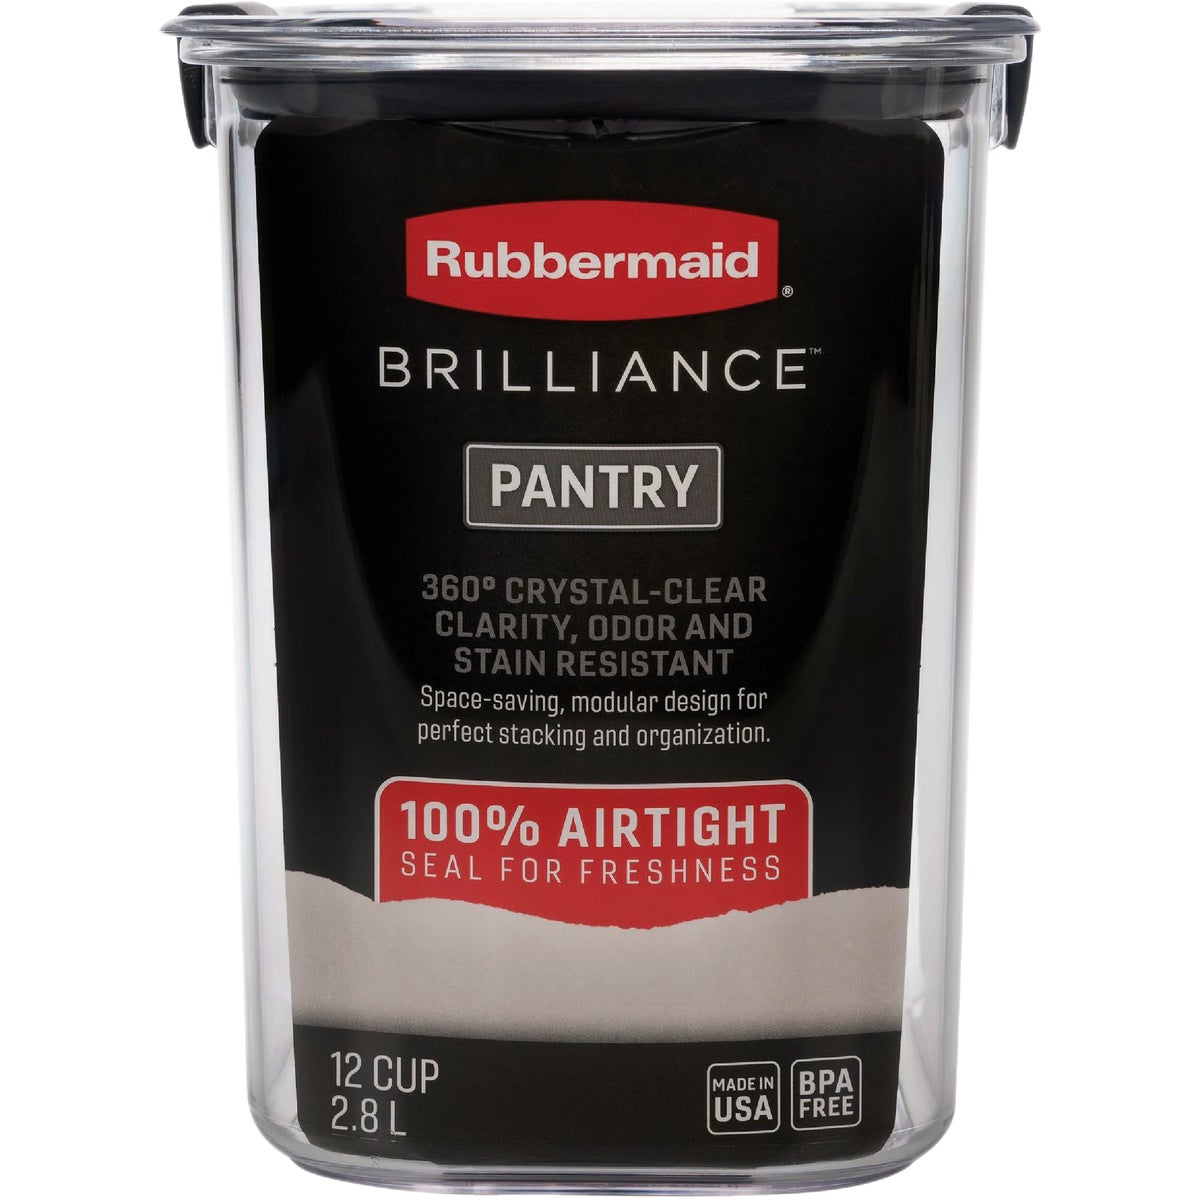 Save on Rubbermaid Brilliance Pantry Storage Container 12 Cup Order Online  Delivery